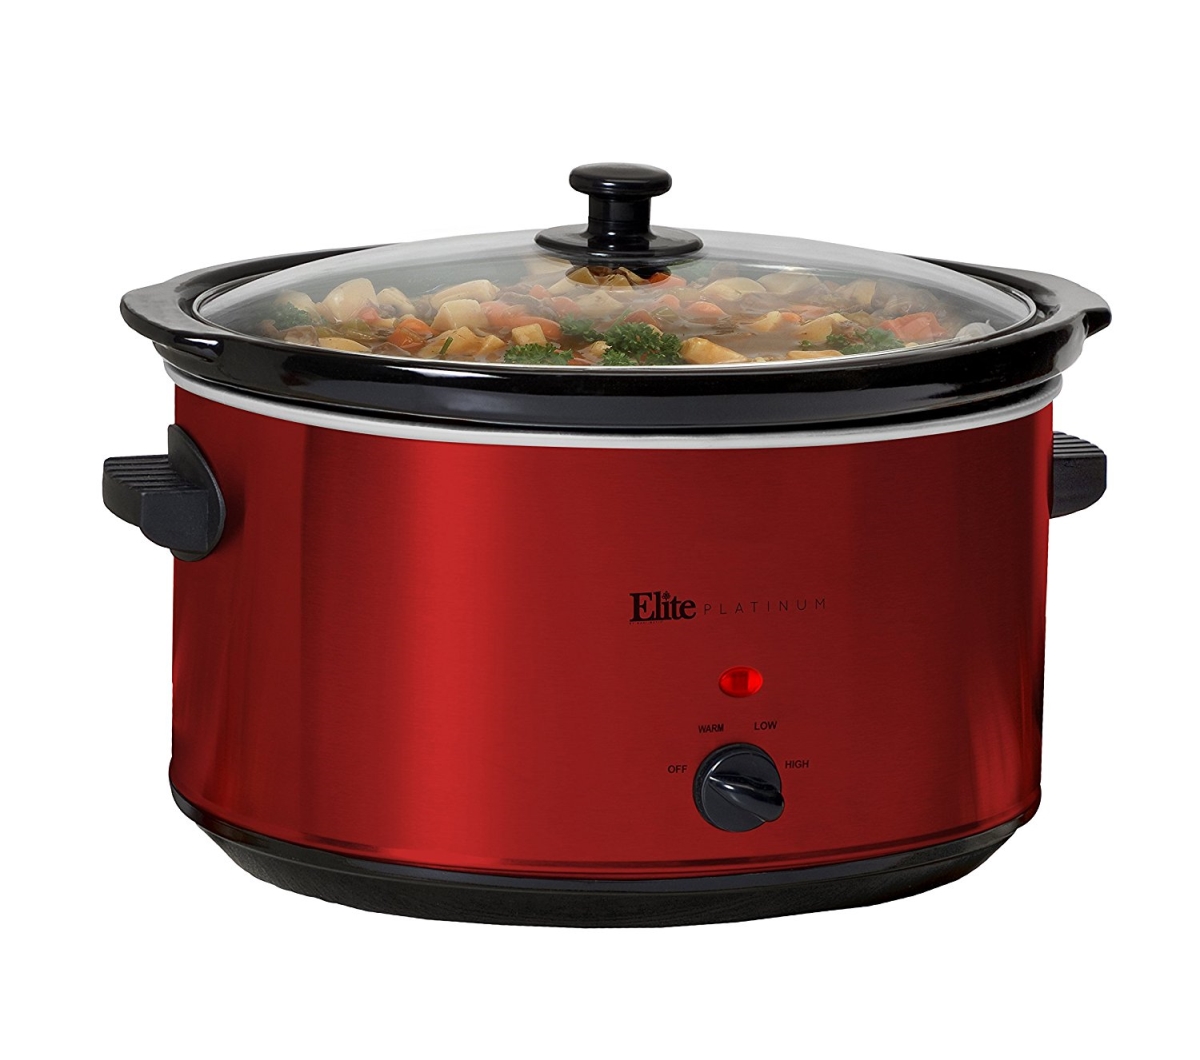 Maxi-matic Mst900r 8.5 Qt. Stainless Steel Slow Cooker, Red